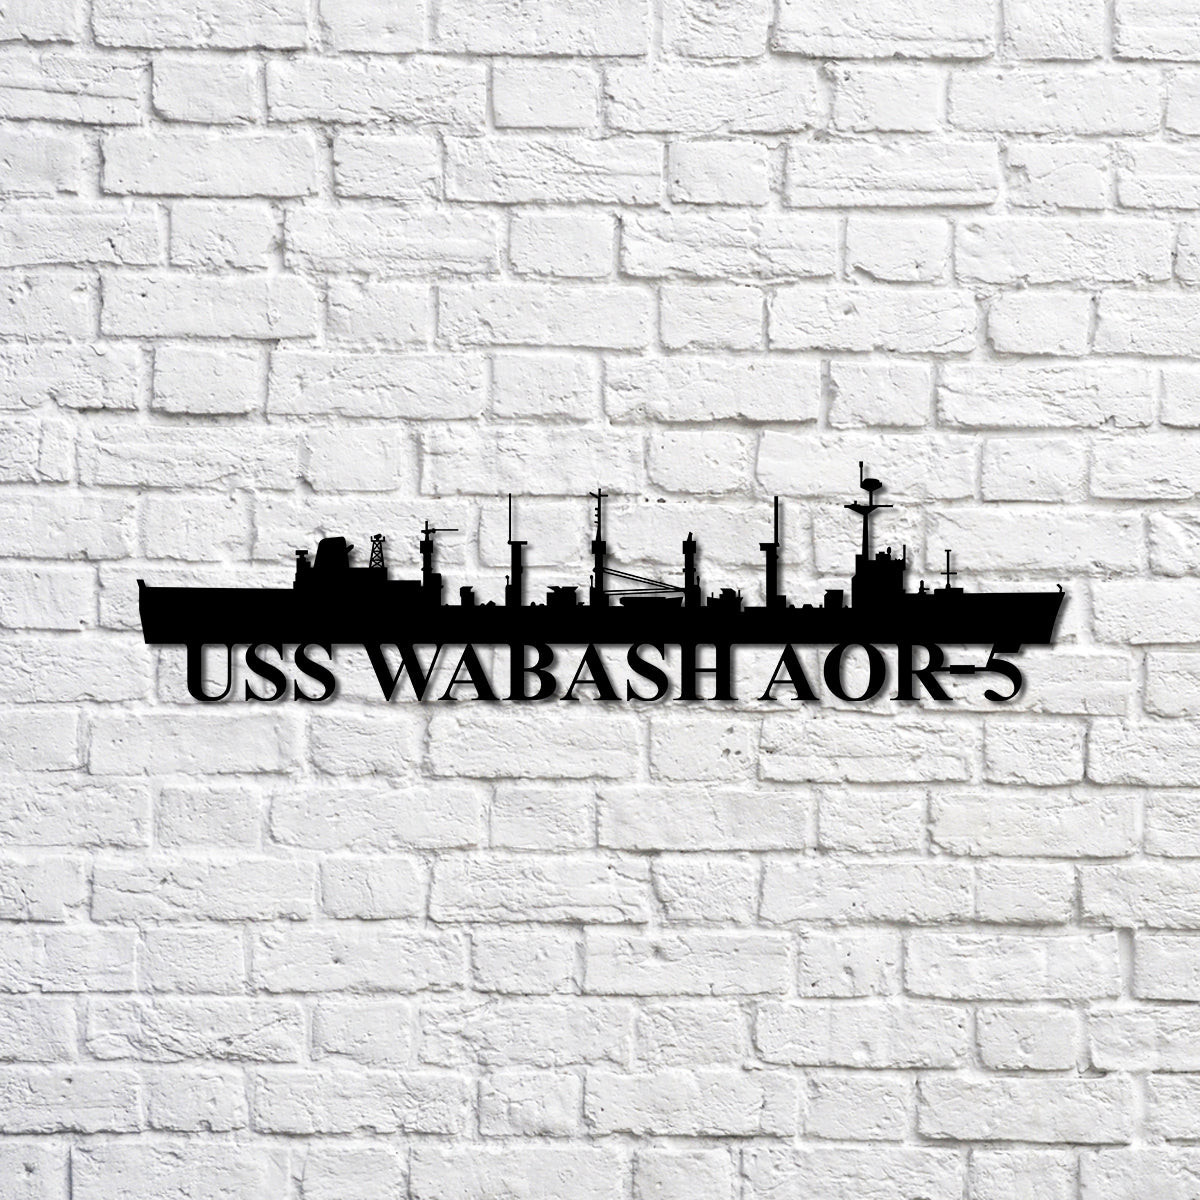 RosabellaPrint Uss Wabash Aor5 Navy Ship Metal Sign, Memory Wall Metal Sign Gift For Navy Veteran, Navy Ships Silhouette Metal Sign Laser Cut Metal Signs Custom Gift Ideas 12x12IN